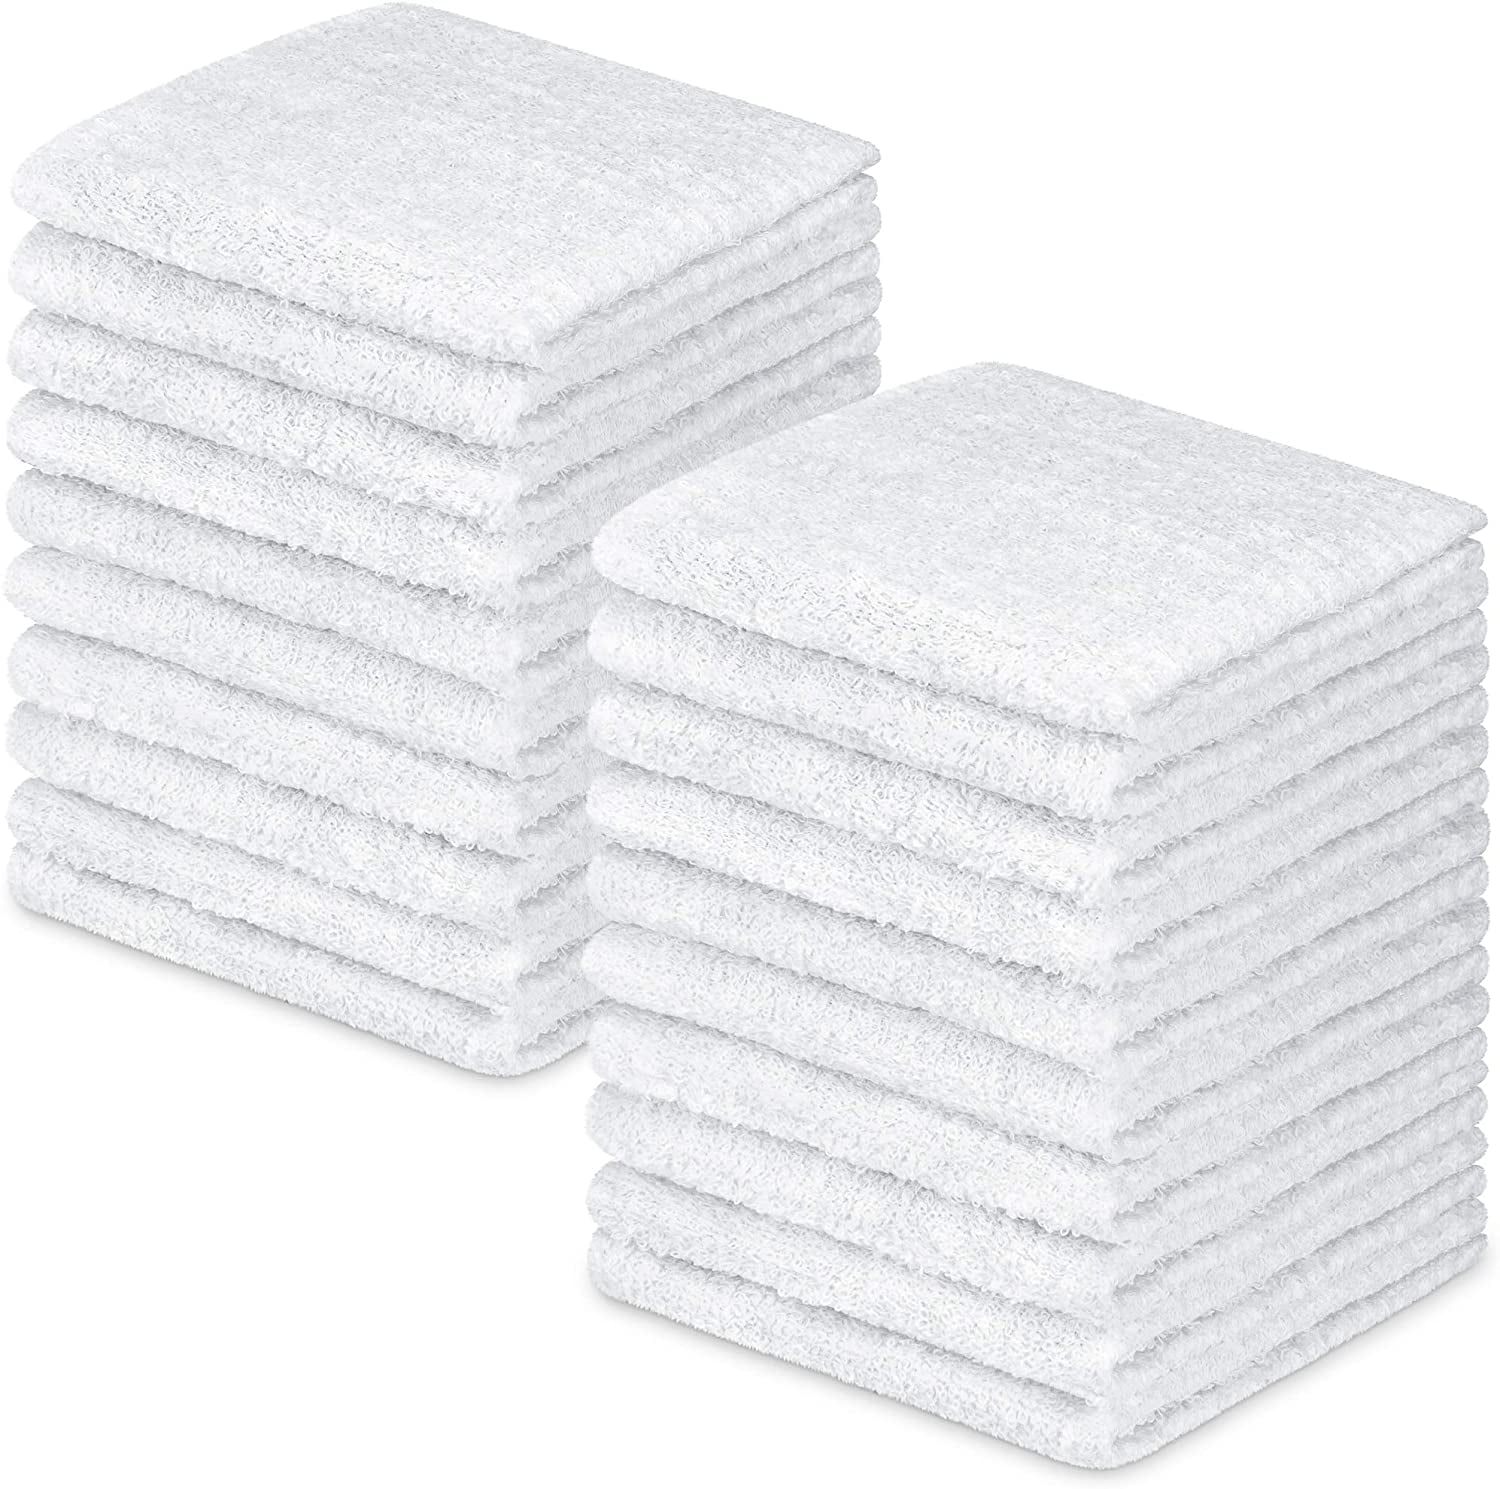 24 Pack White Wash Cloth For Bathroom, Kitchen 100% Cotton 12 x 12 Size